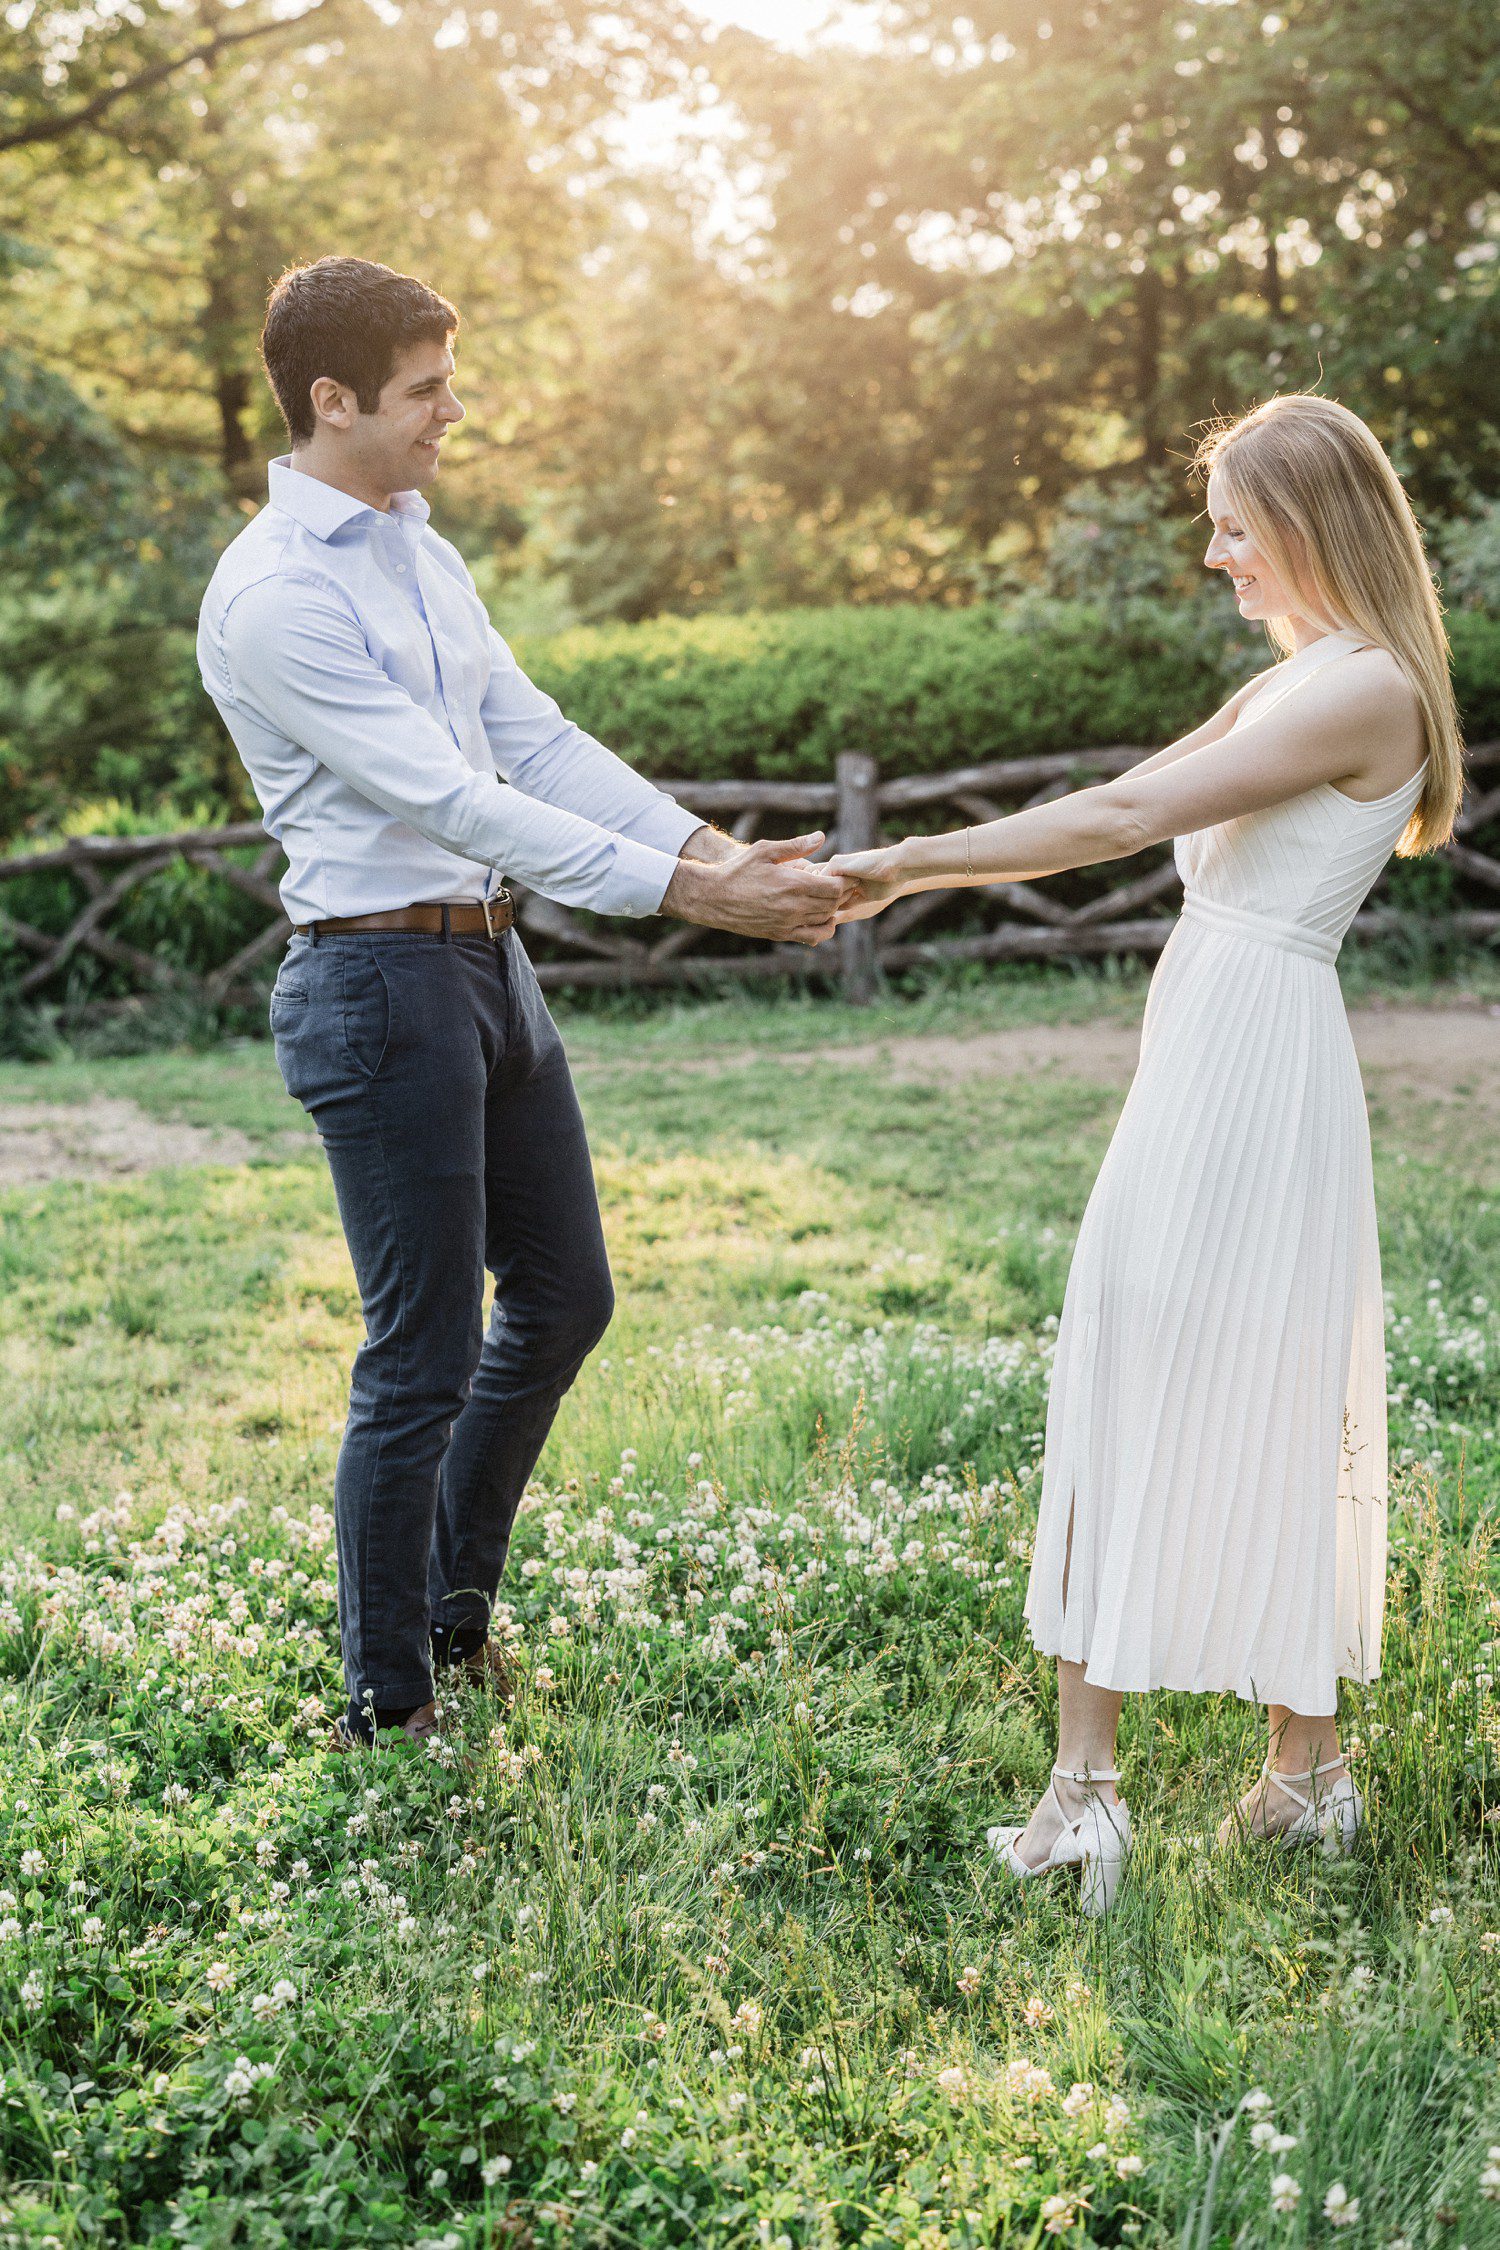 Central Park Engagement Session in NYC.